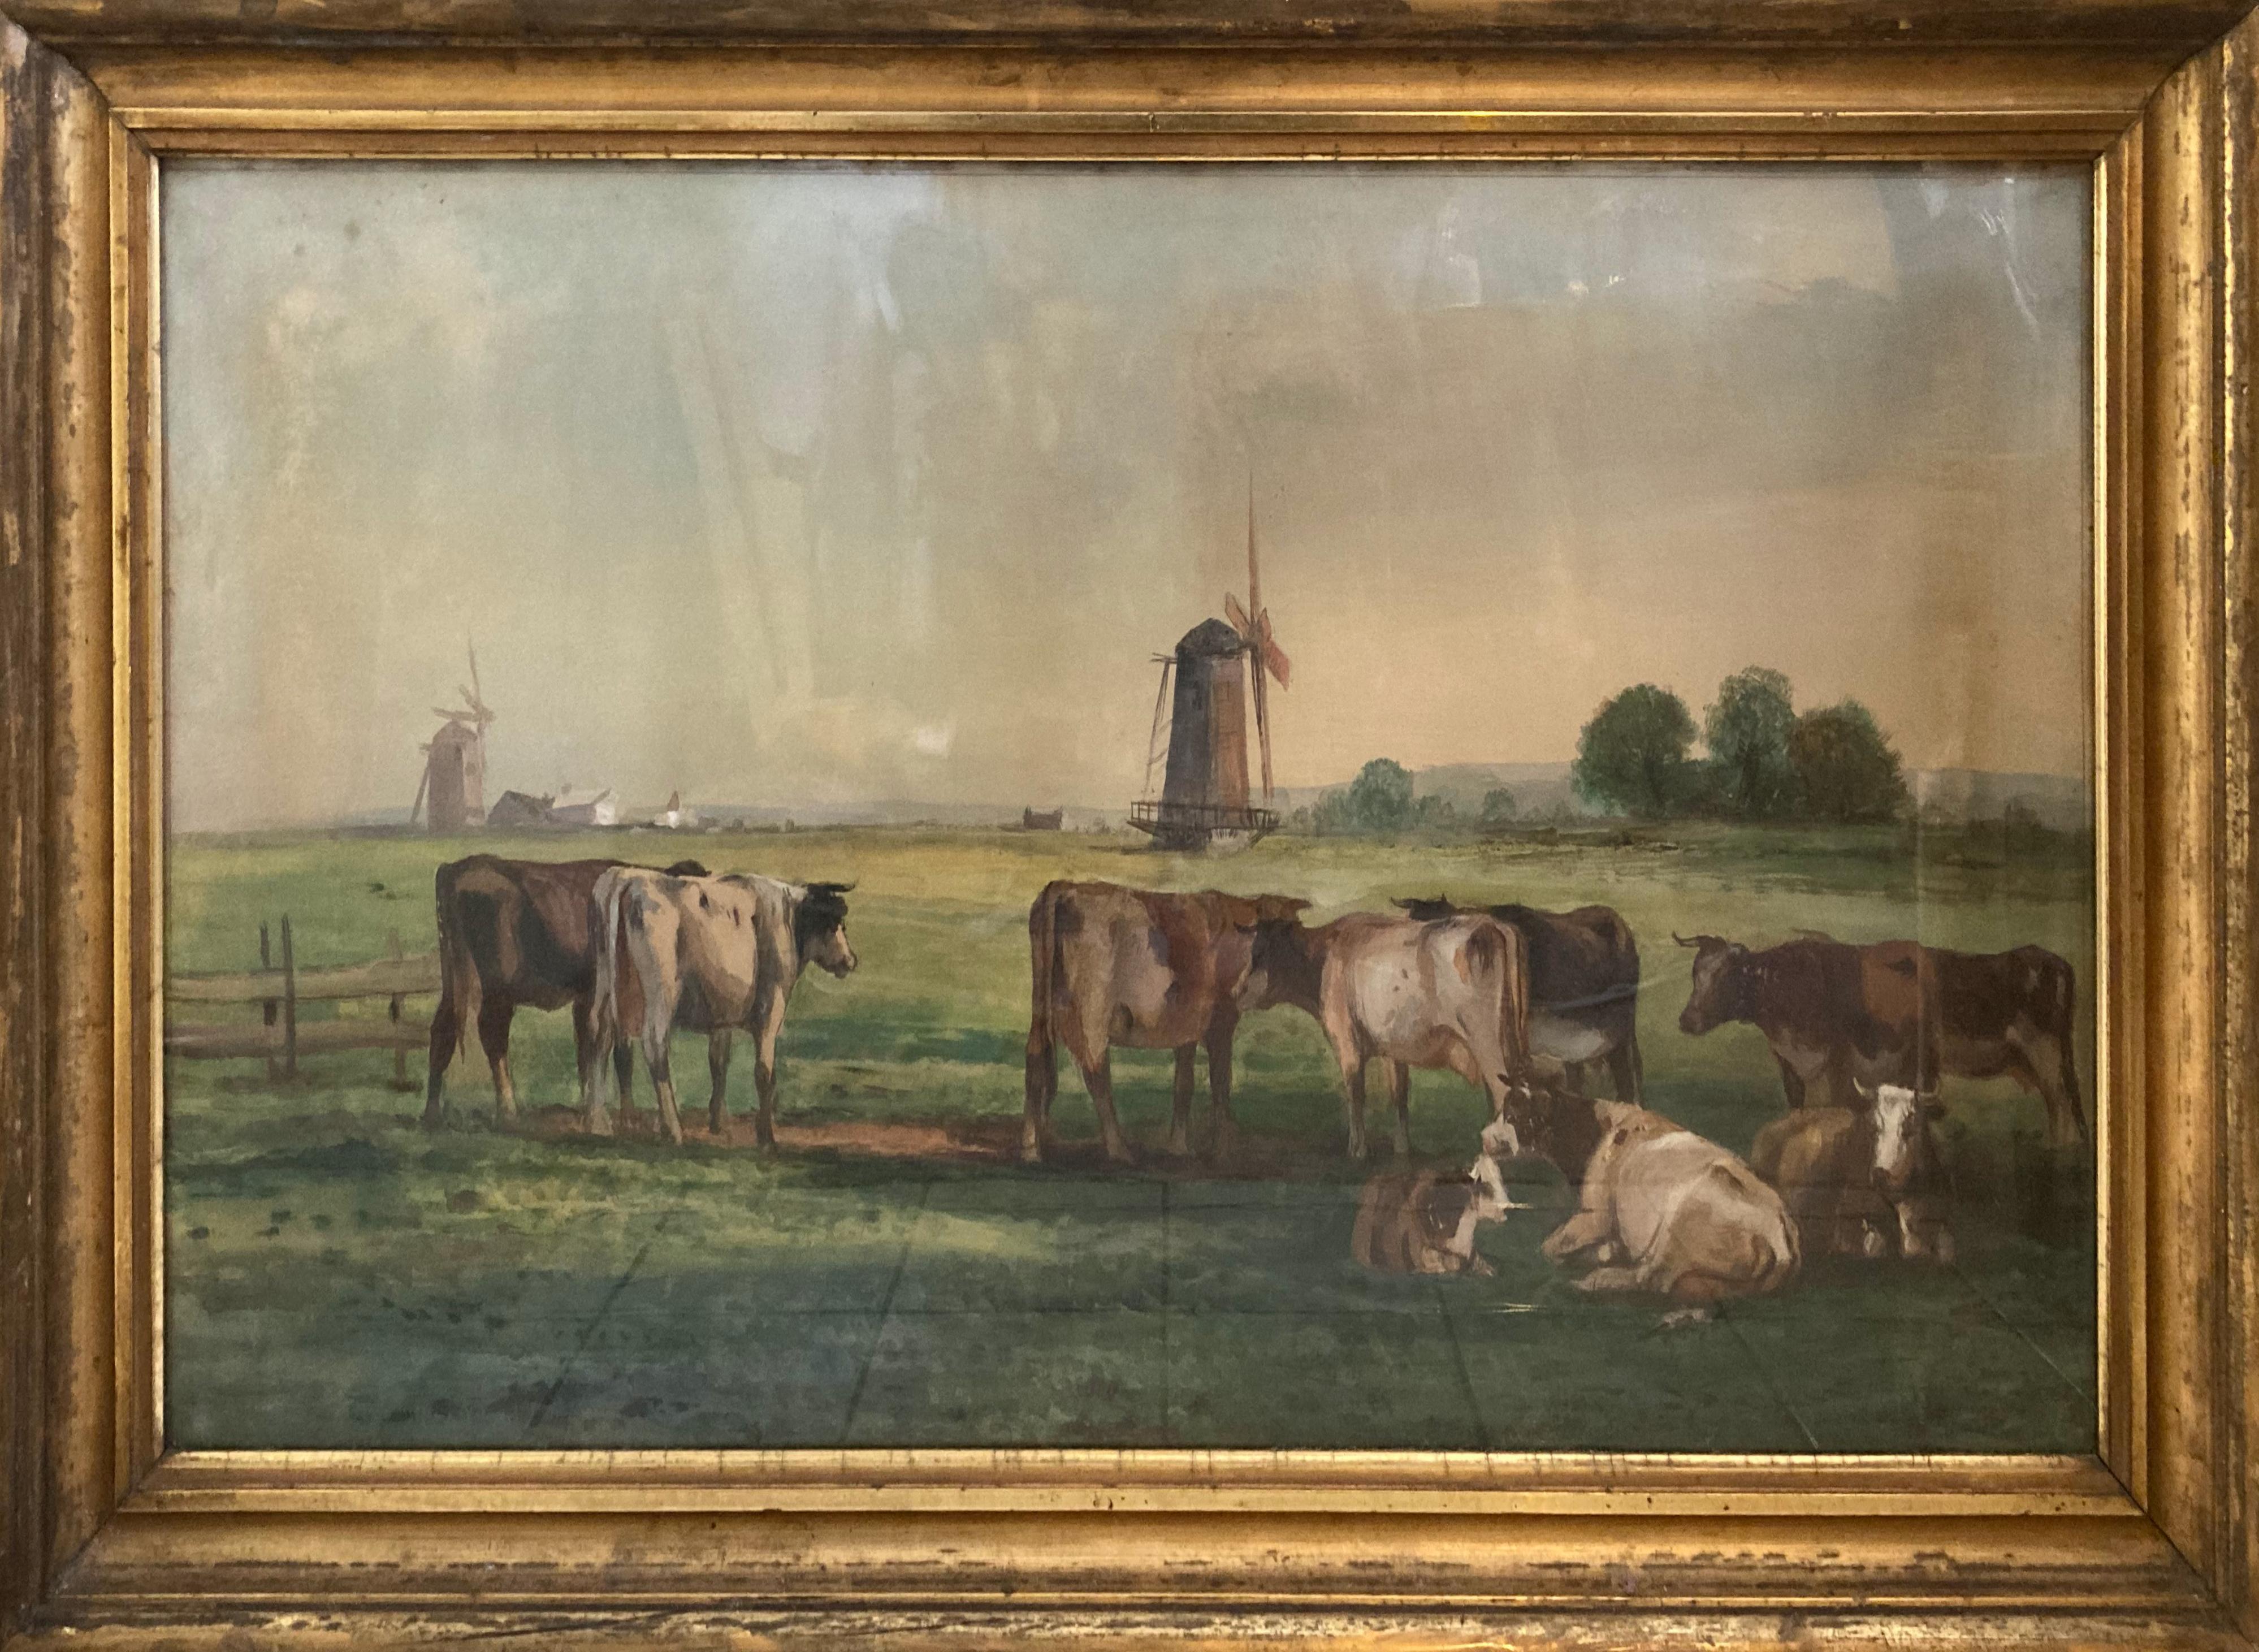 Unknown Landscape Painting - Cattle with Windmills (Large Framed 20th Century Antique Watercolor Landscape)